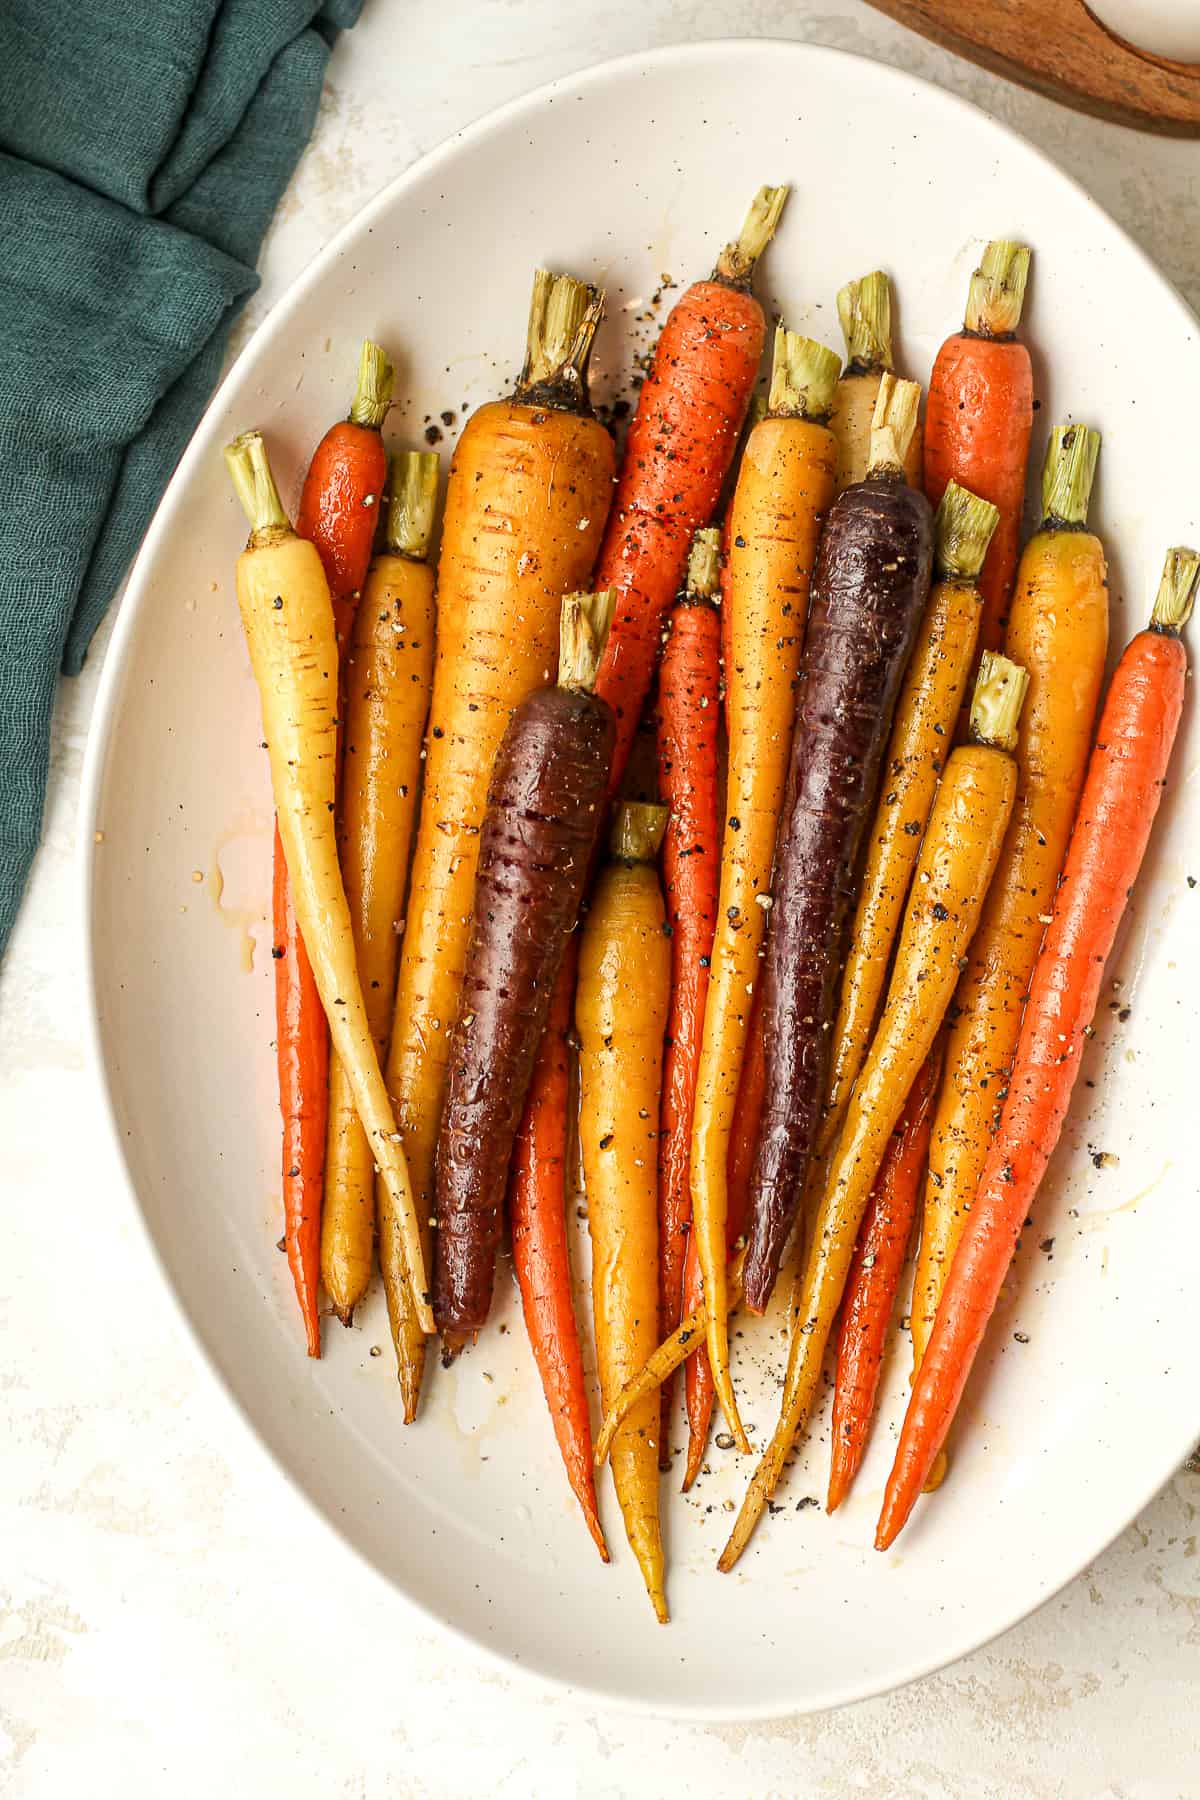 A serving dish with maple glazed roasted carrots.